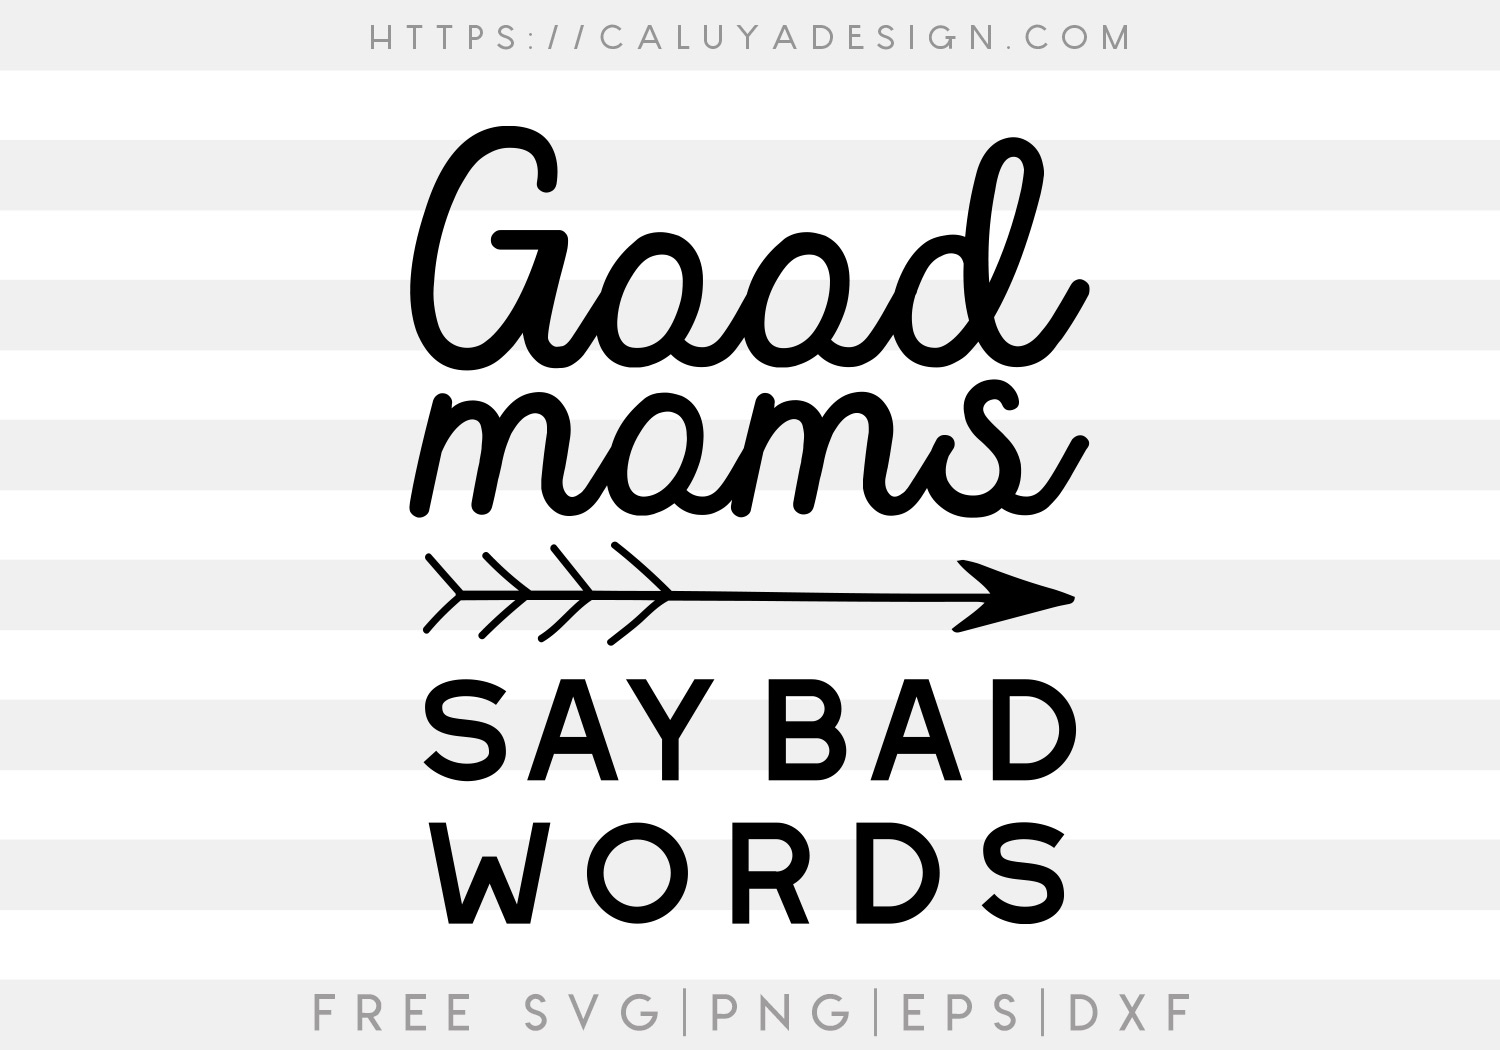 Download Clip Art Quote Svg Rustic Svg Blessed Svg Cutfile For Silhouette Hold On Tight To Your Dreams Svg Love Svg Saying Svg Dxf Png And Jpg Art Collectibles